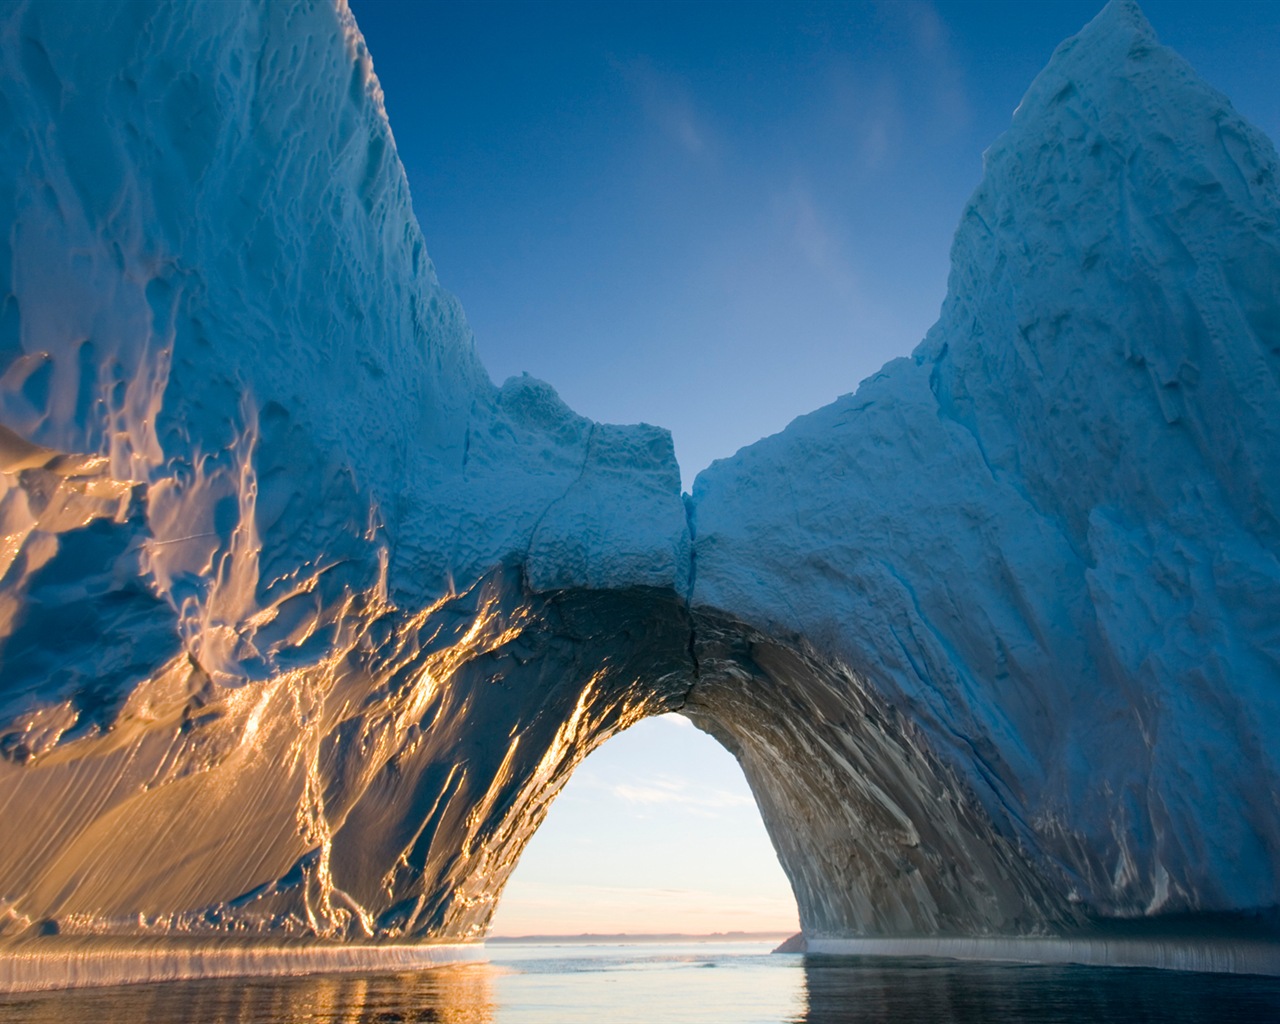 Windows 8 Wallpapers: Arctic, the nature ecological landscape, arctic animals #3 - 1280x1024